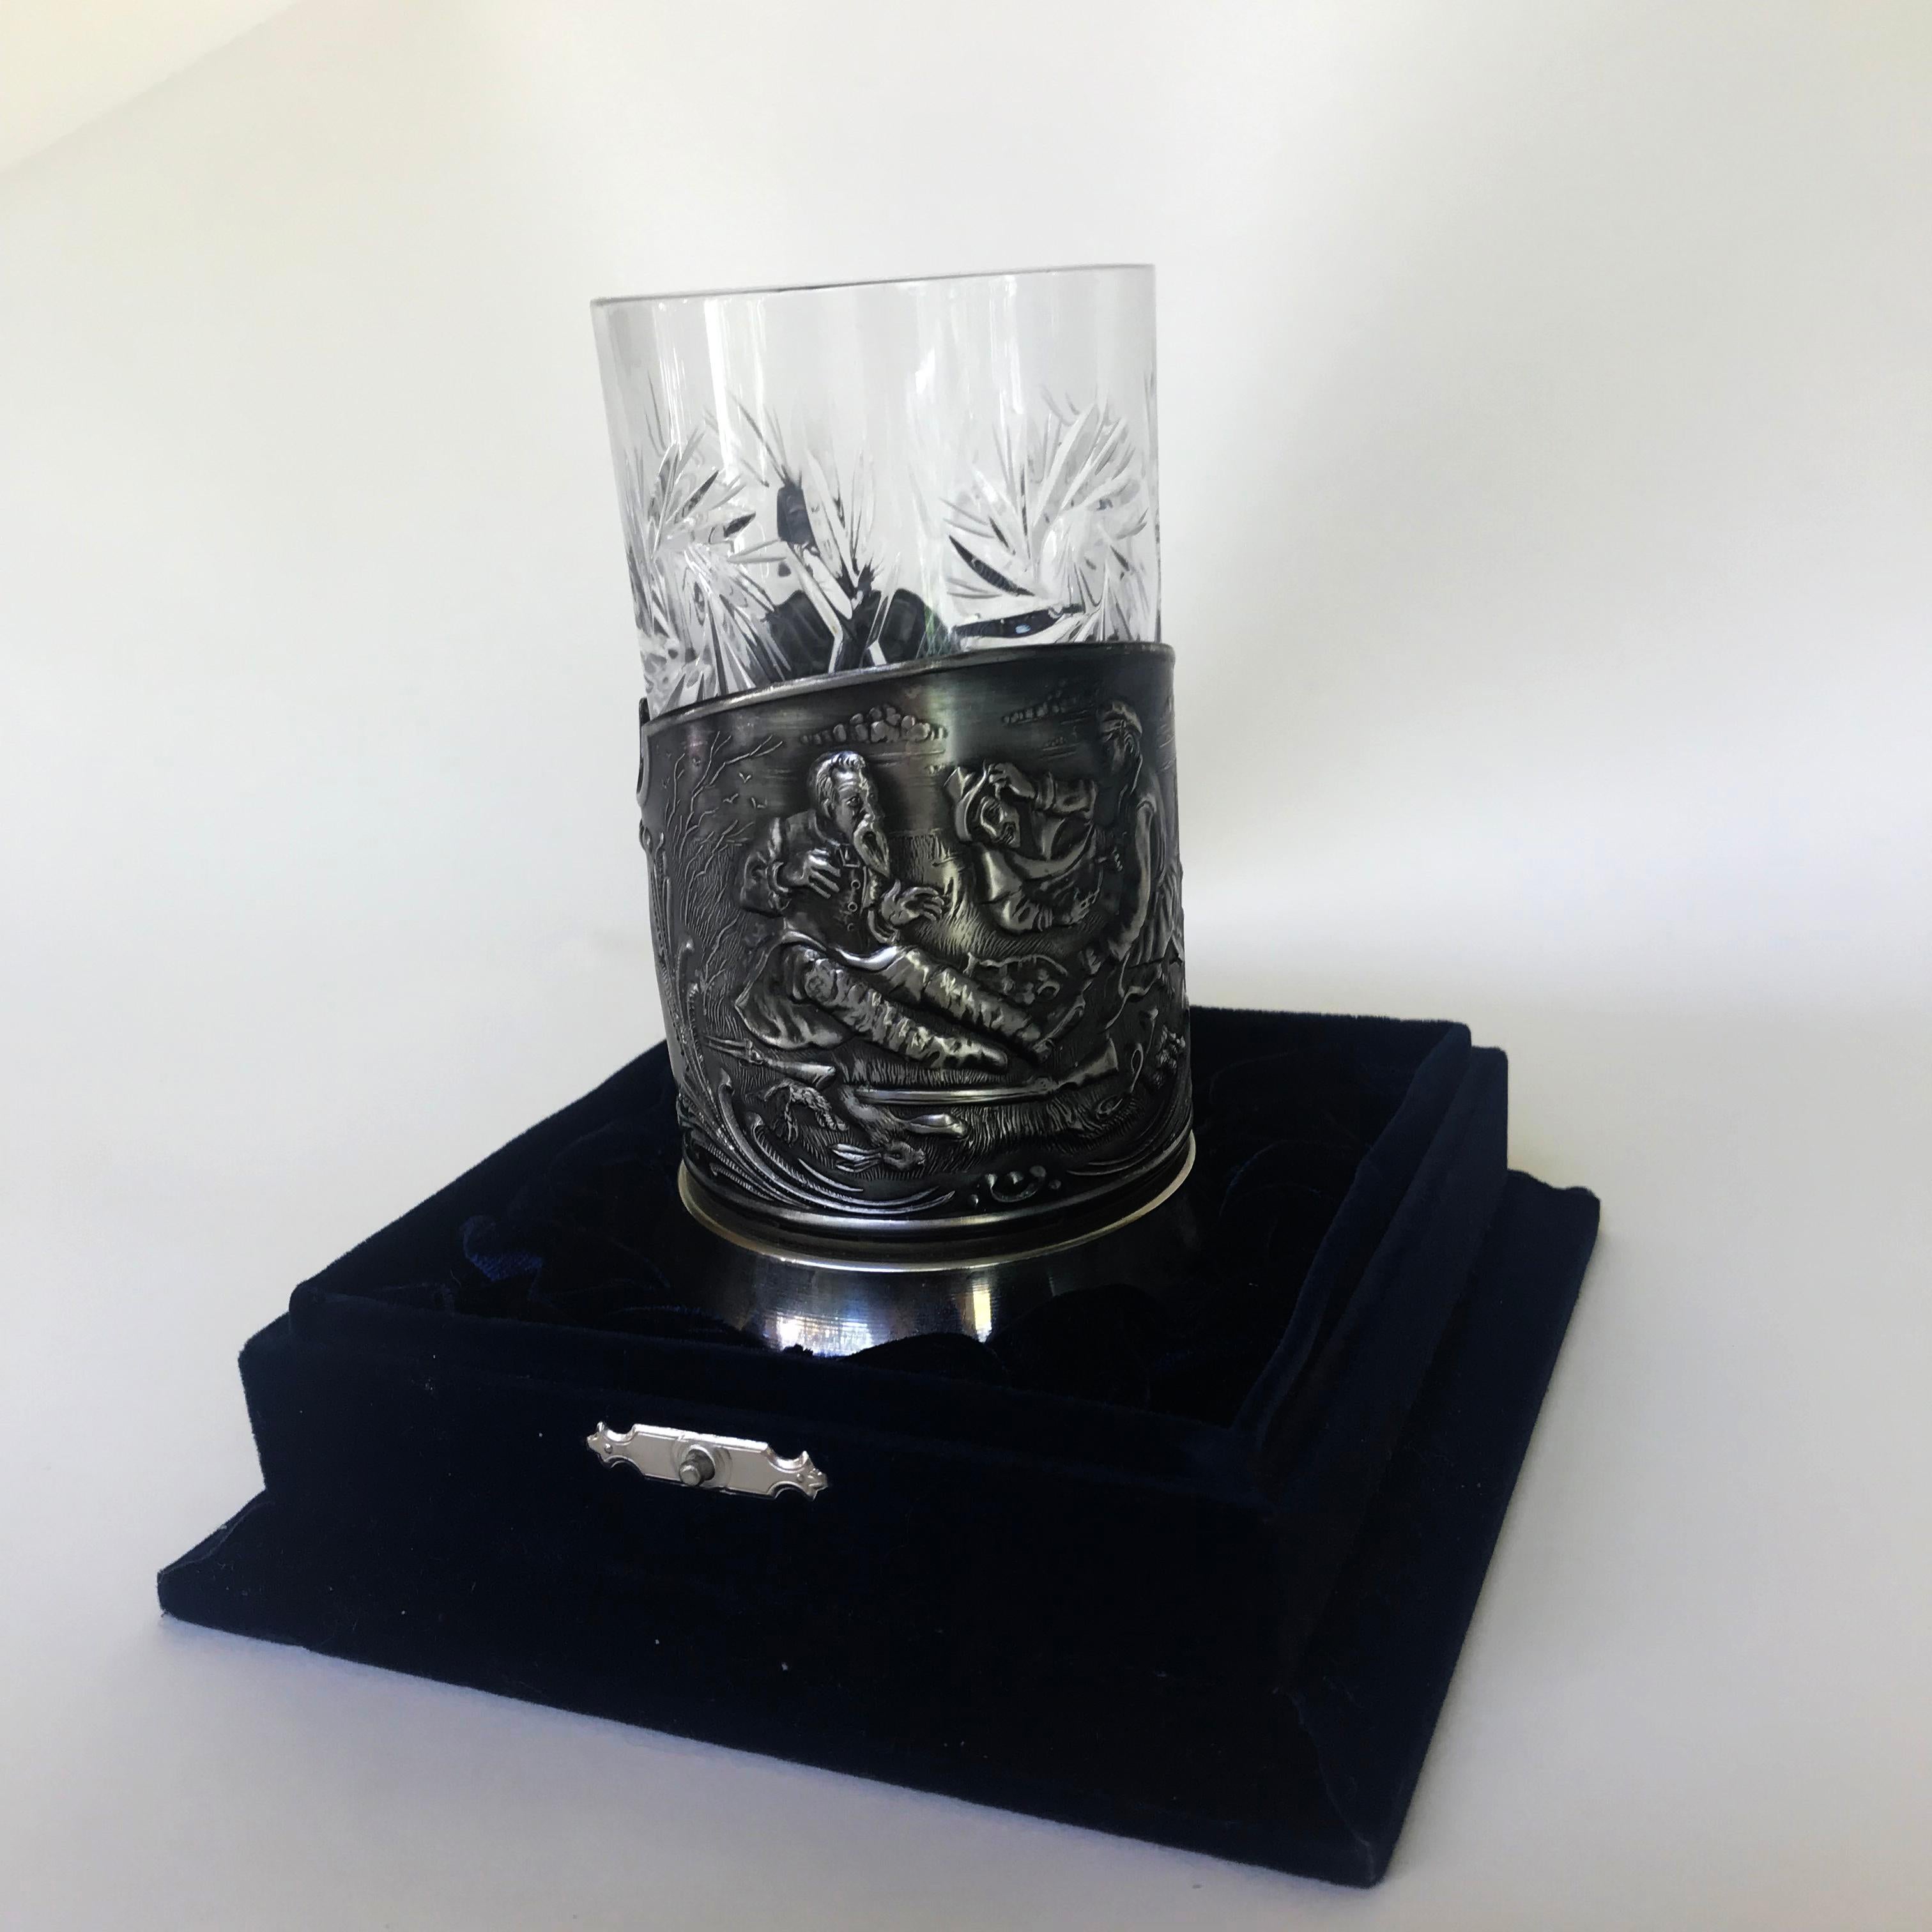 This unique Russian metal crystal glass holder is from the 20th century. It comes with a crystal glass and in the original velvet blue box. It is engrave with a unique technique which portraits Russian history. It is perfect for a gift, Russian